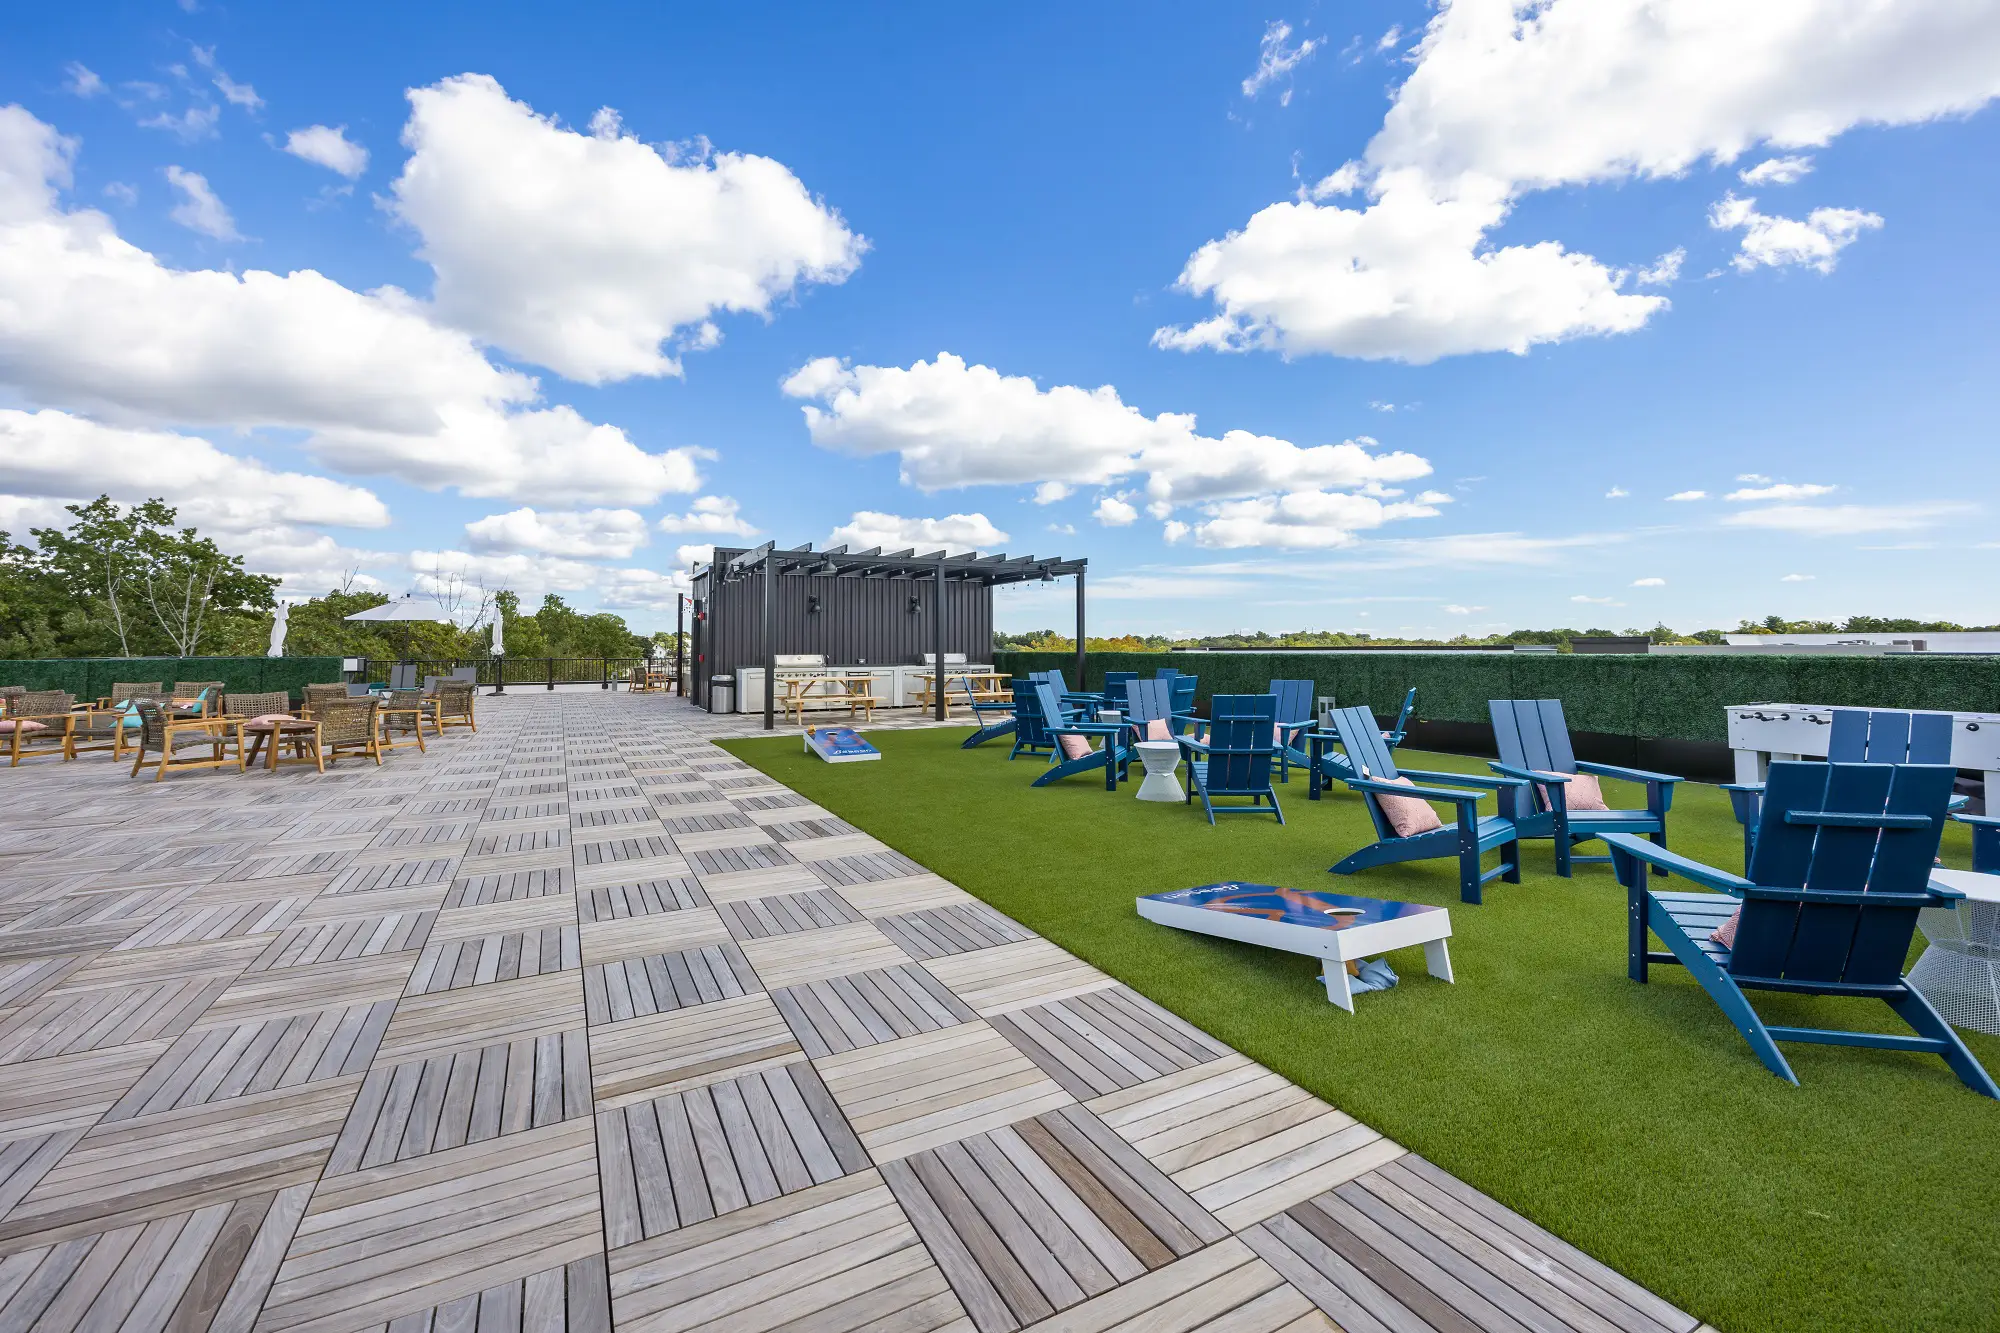 The Beacon rooftop game lawn and grill area with pergola covering, corn hole, foosball, and patio chairs